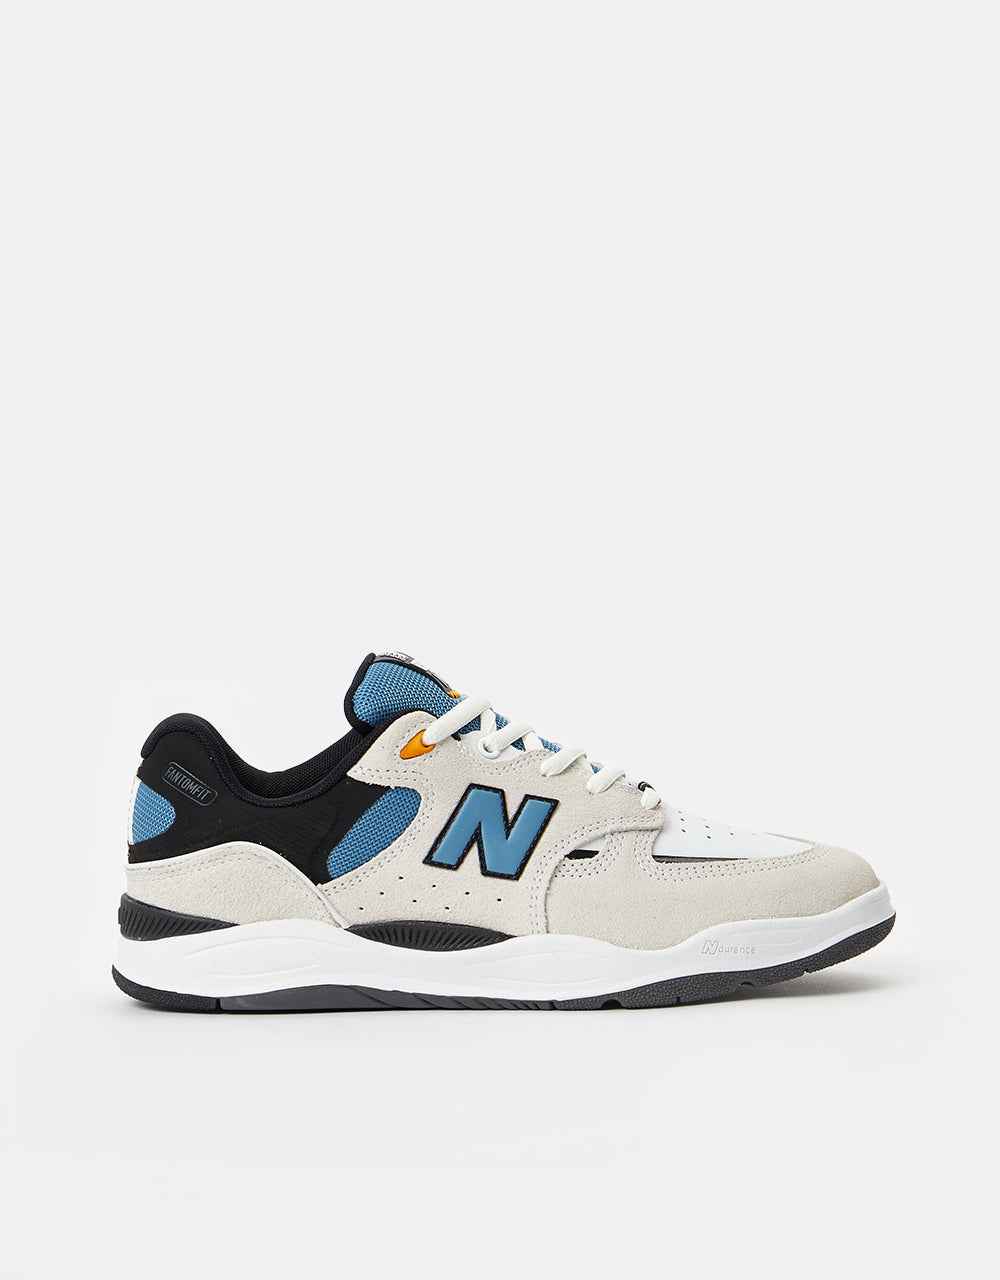 New Balance Numeric 1010 R1 UK Exclusive Skate Shoes - Light Grey/Blue –  Route One